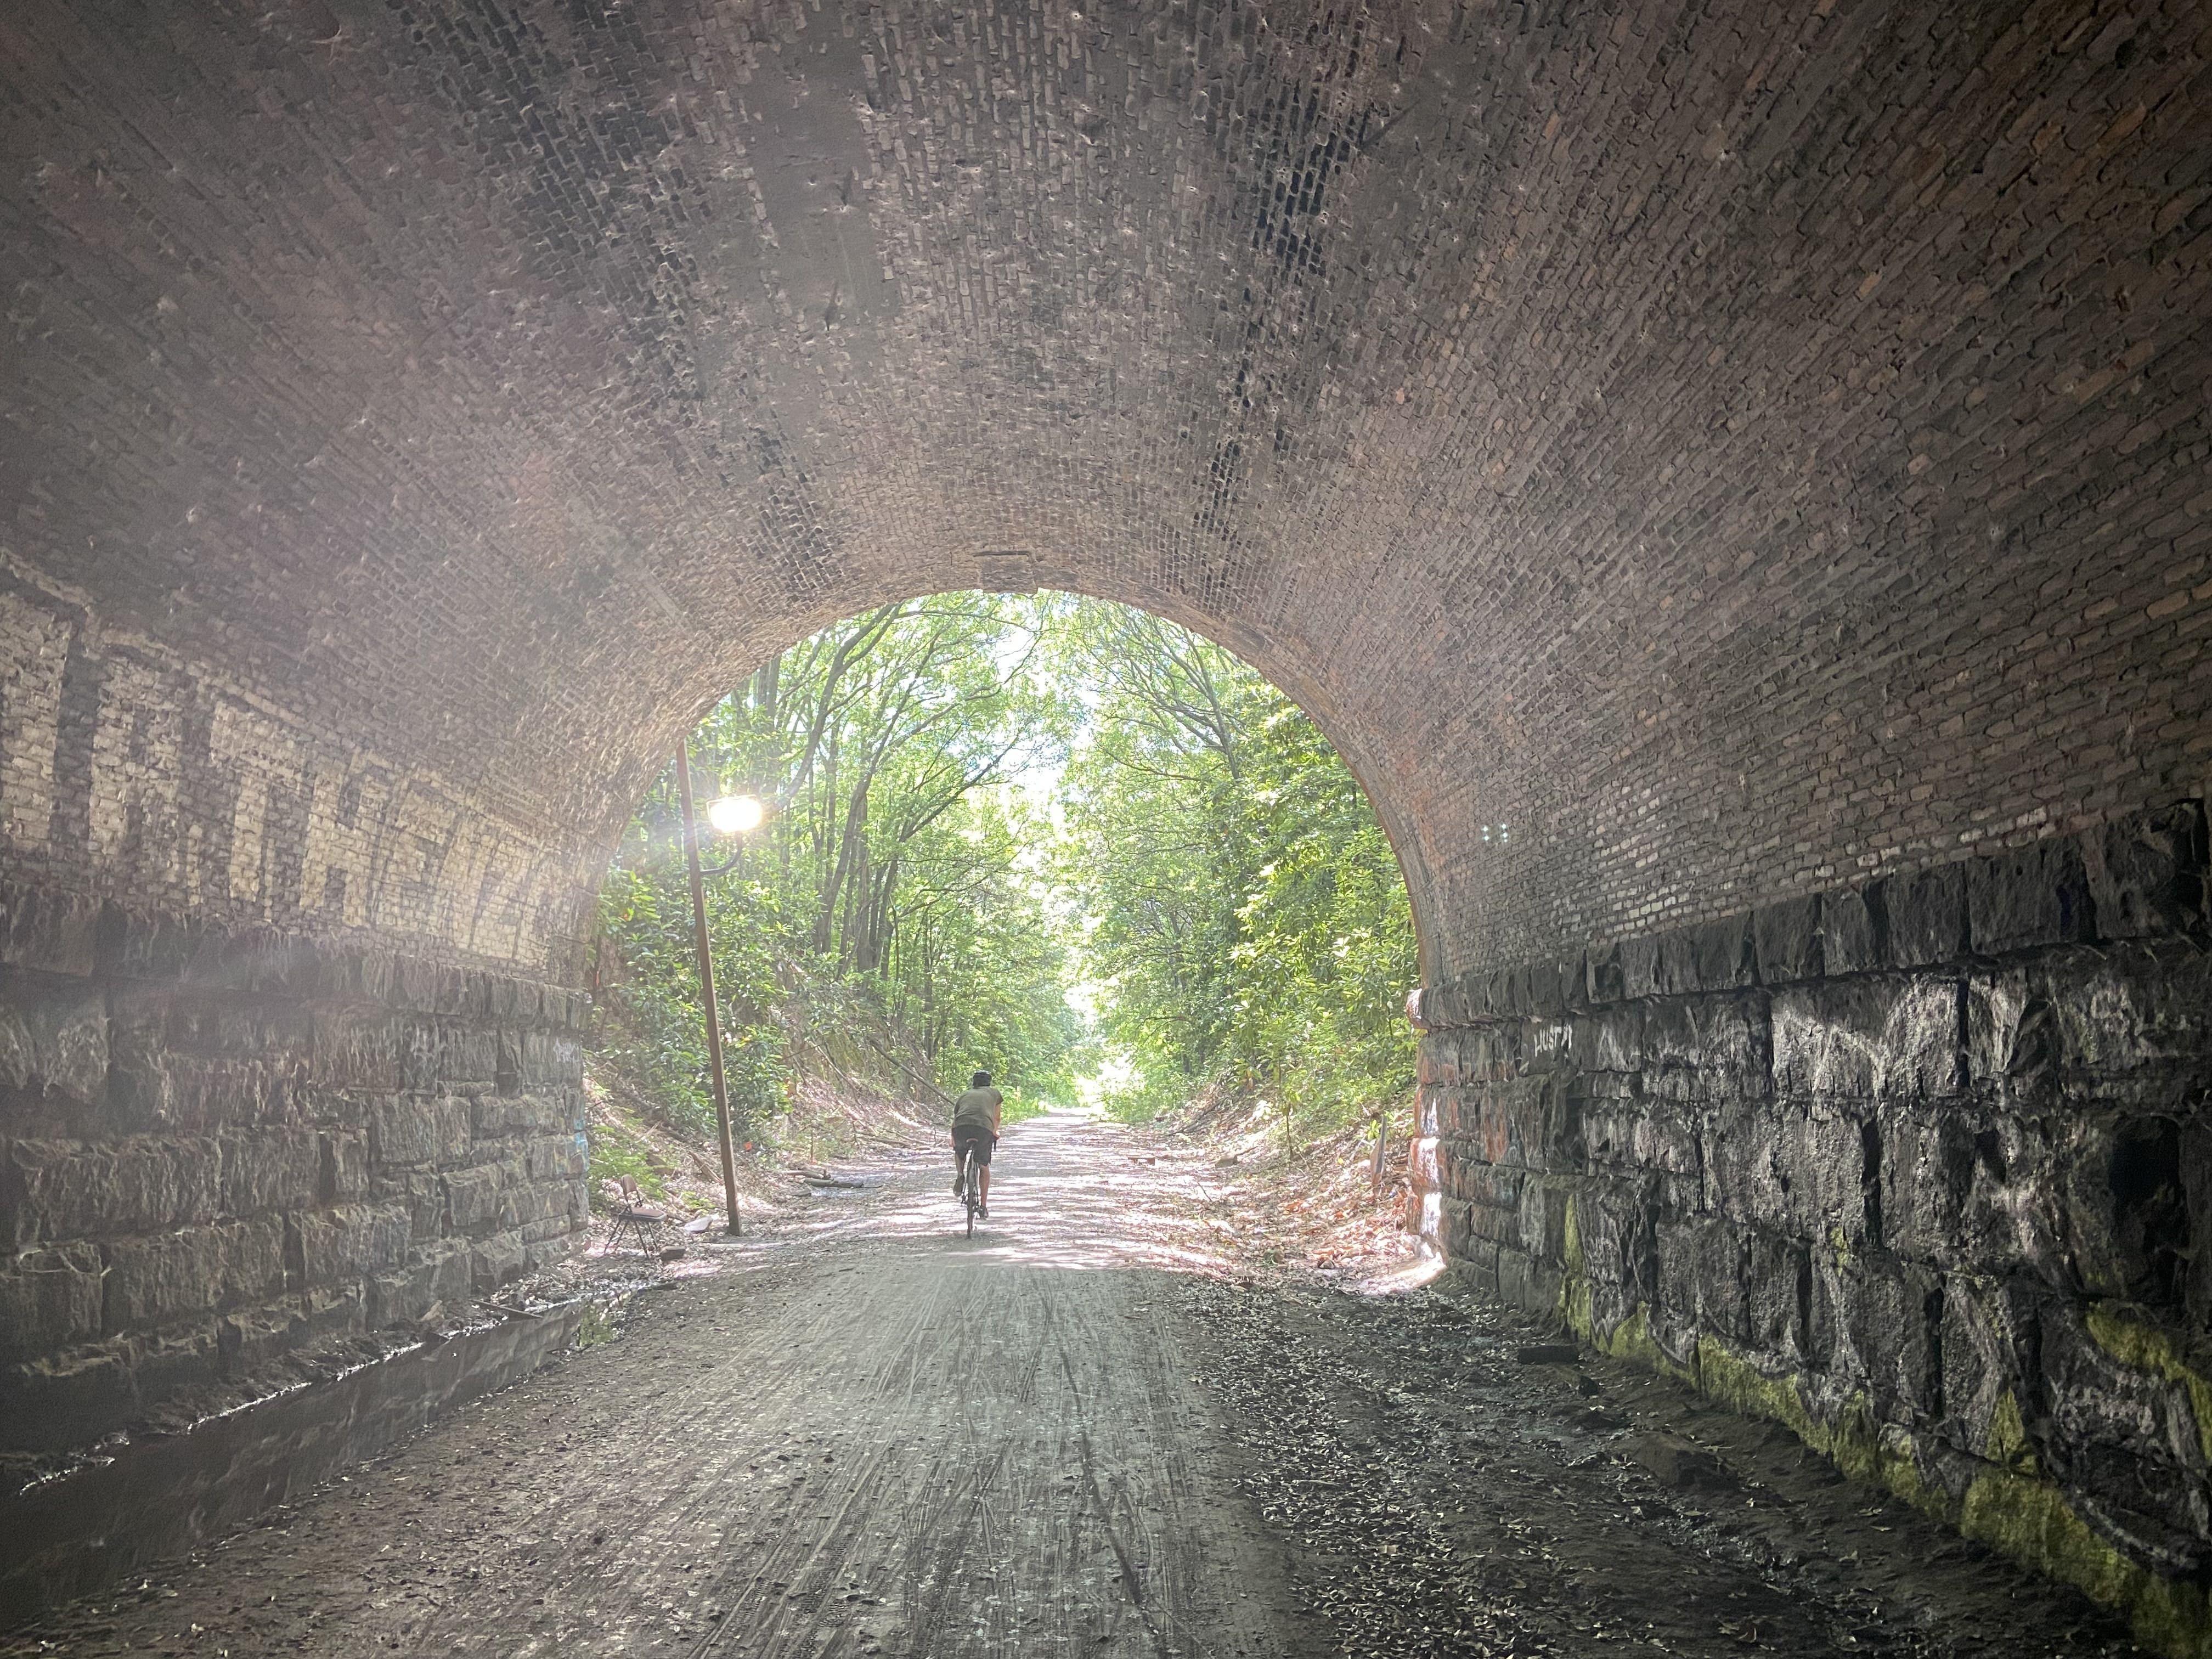 A bicyclist pedals on a gravel path passing through a tunnel with a rounded arch